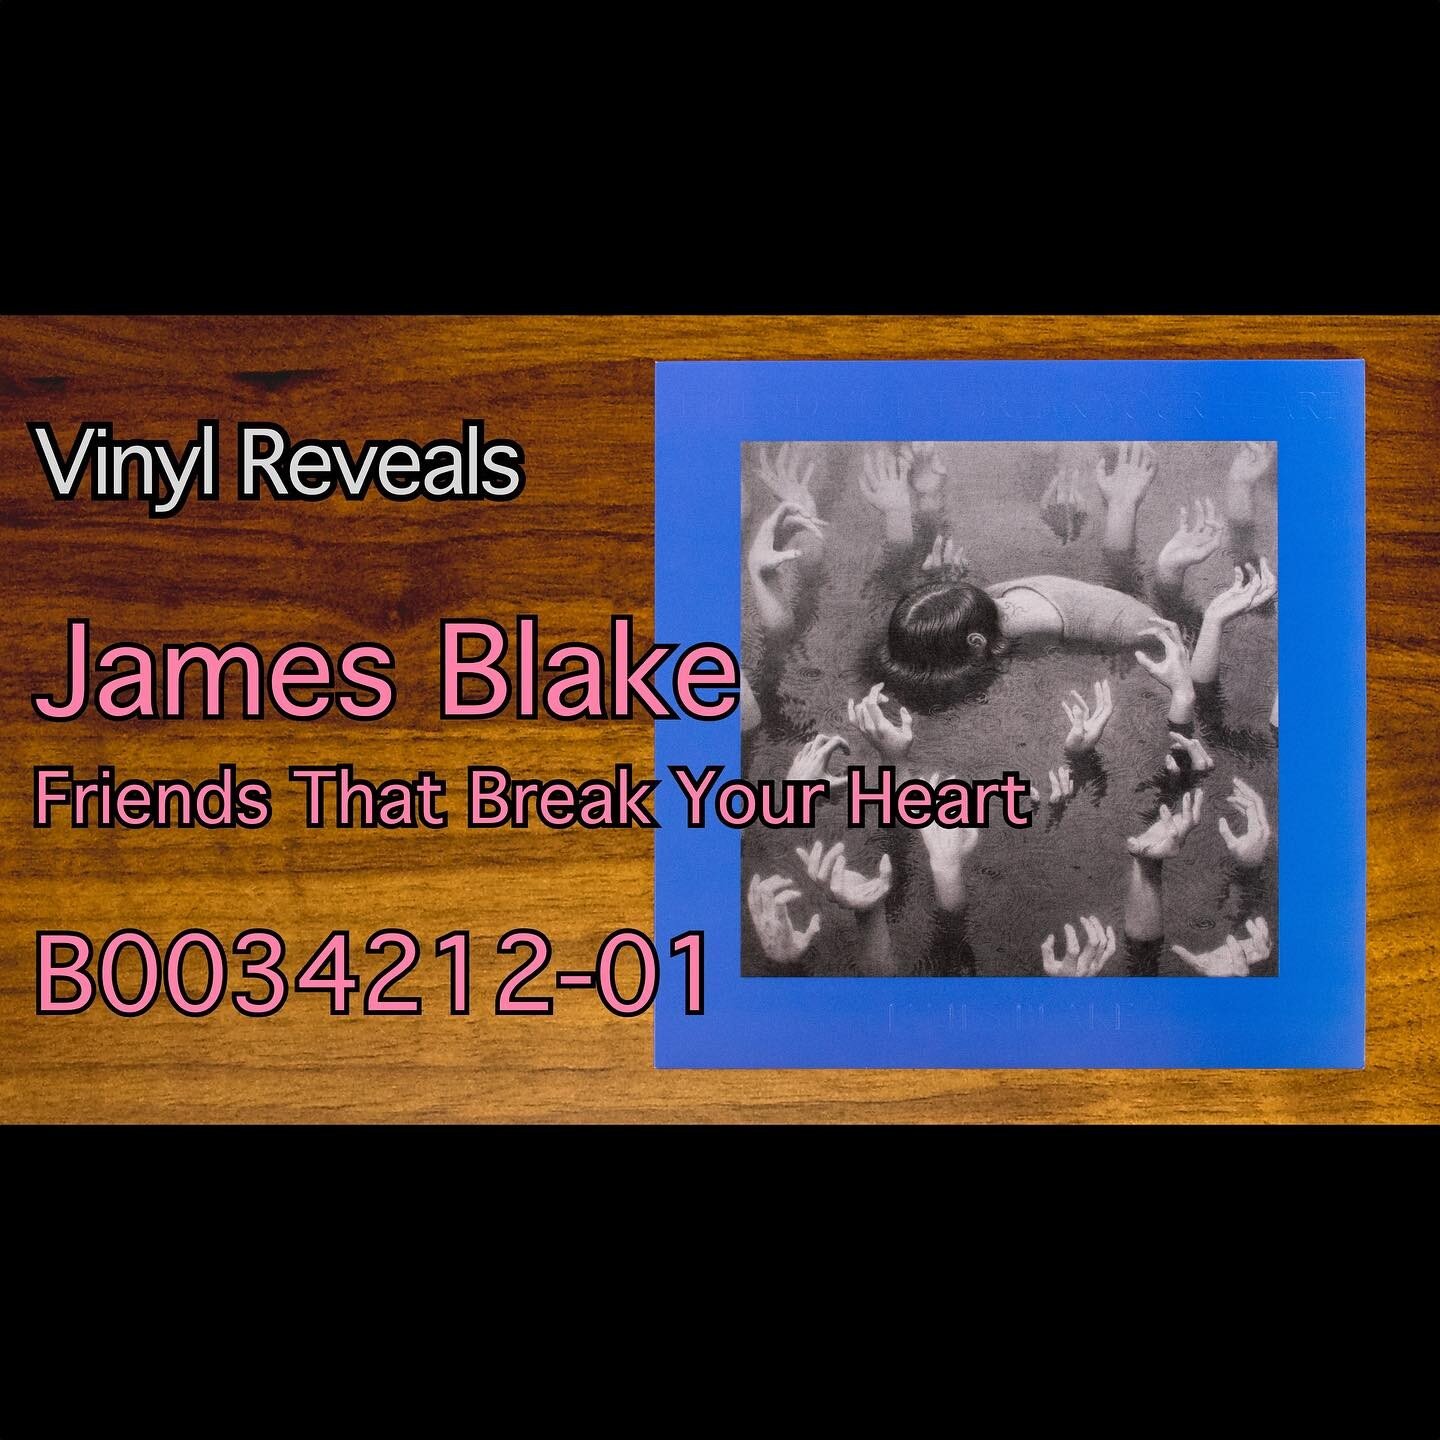 Today we are looking at Friends That Break Your Heart by James Blake. Video is now live on the Vinyl Reveals YouTube channel. Link in profile.

#vinylReveal #vinyl #vinylcollection #vinylrecords #records #vinylReveals #vinylcommunity @jamesblake